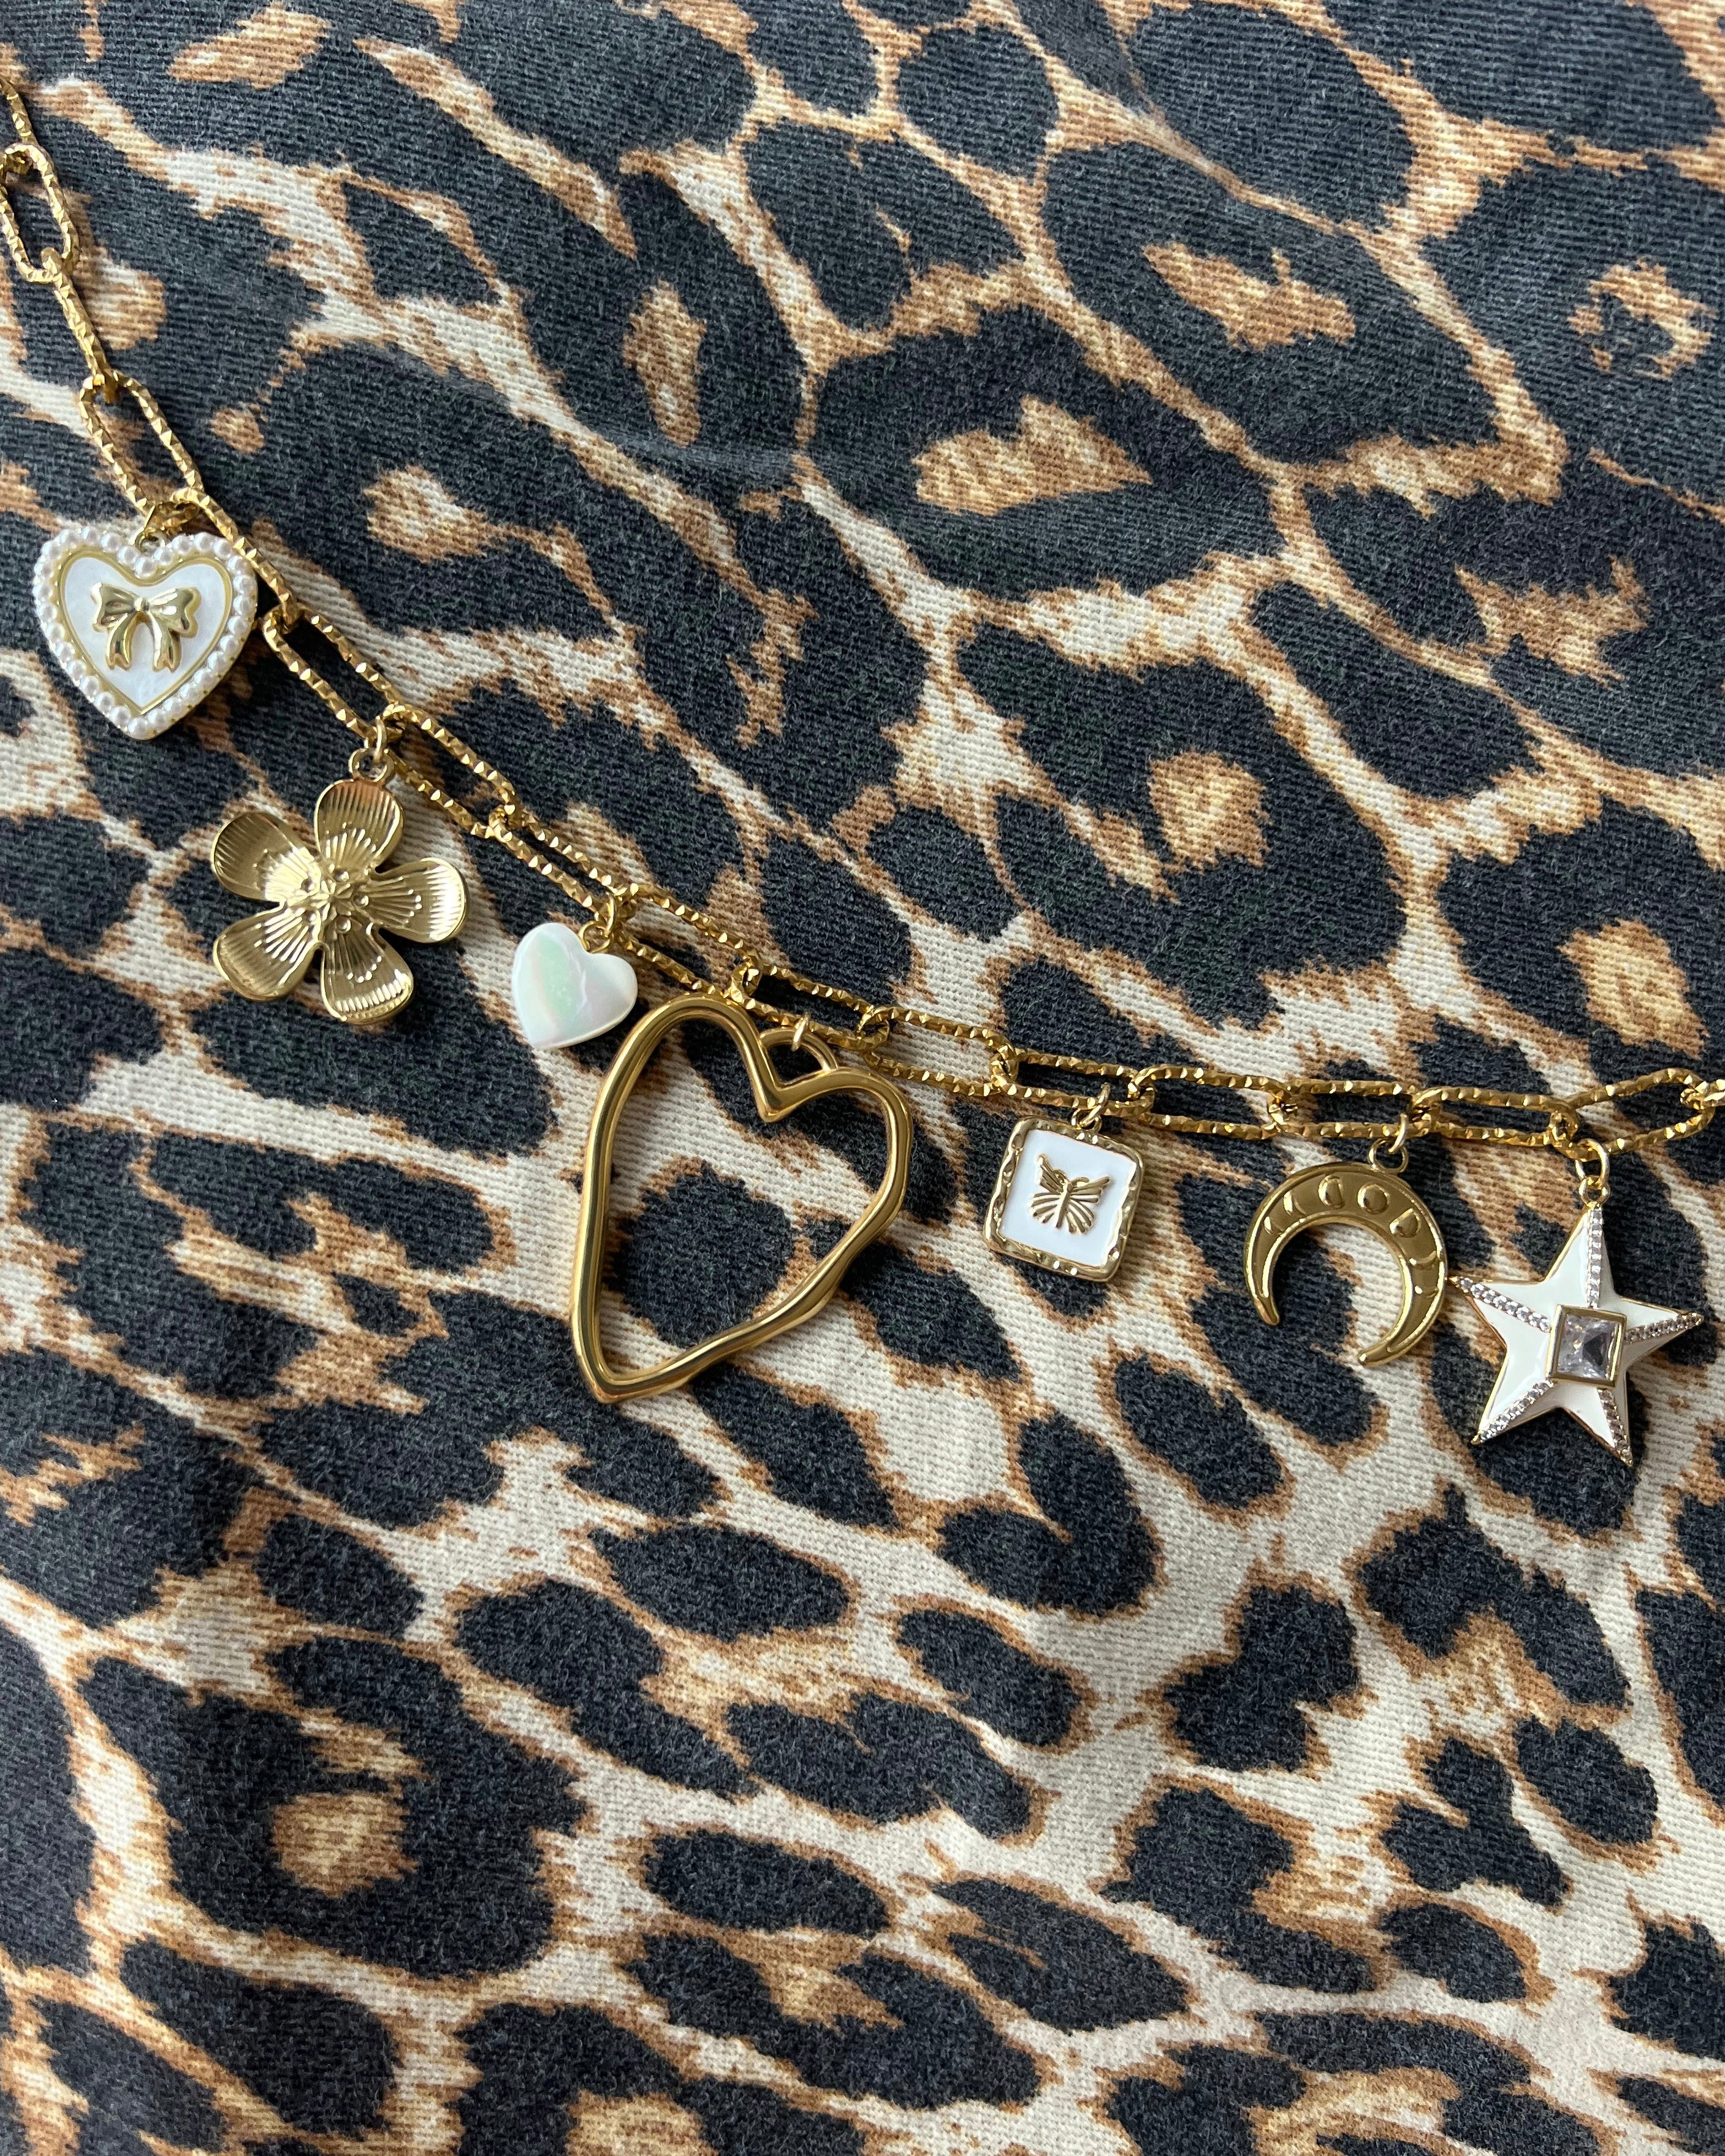 “Leopard love” charm necklace gold